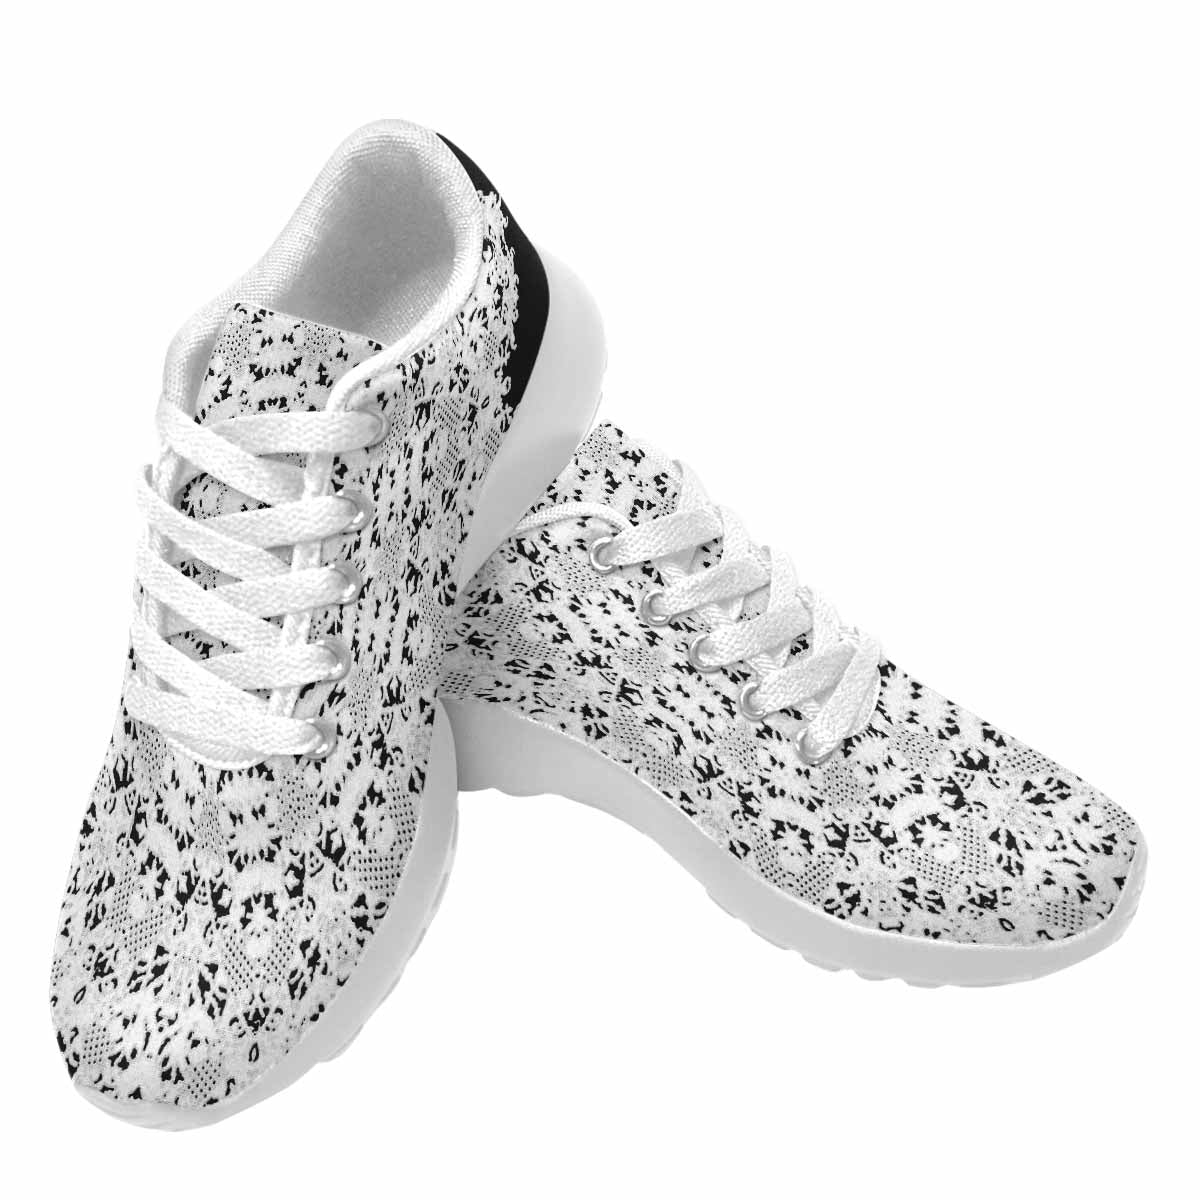 Victorian lace print, womens cute casual or running sneakers, design 50